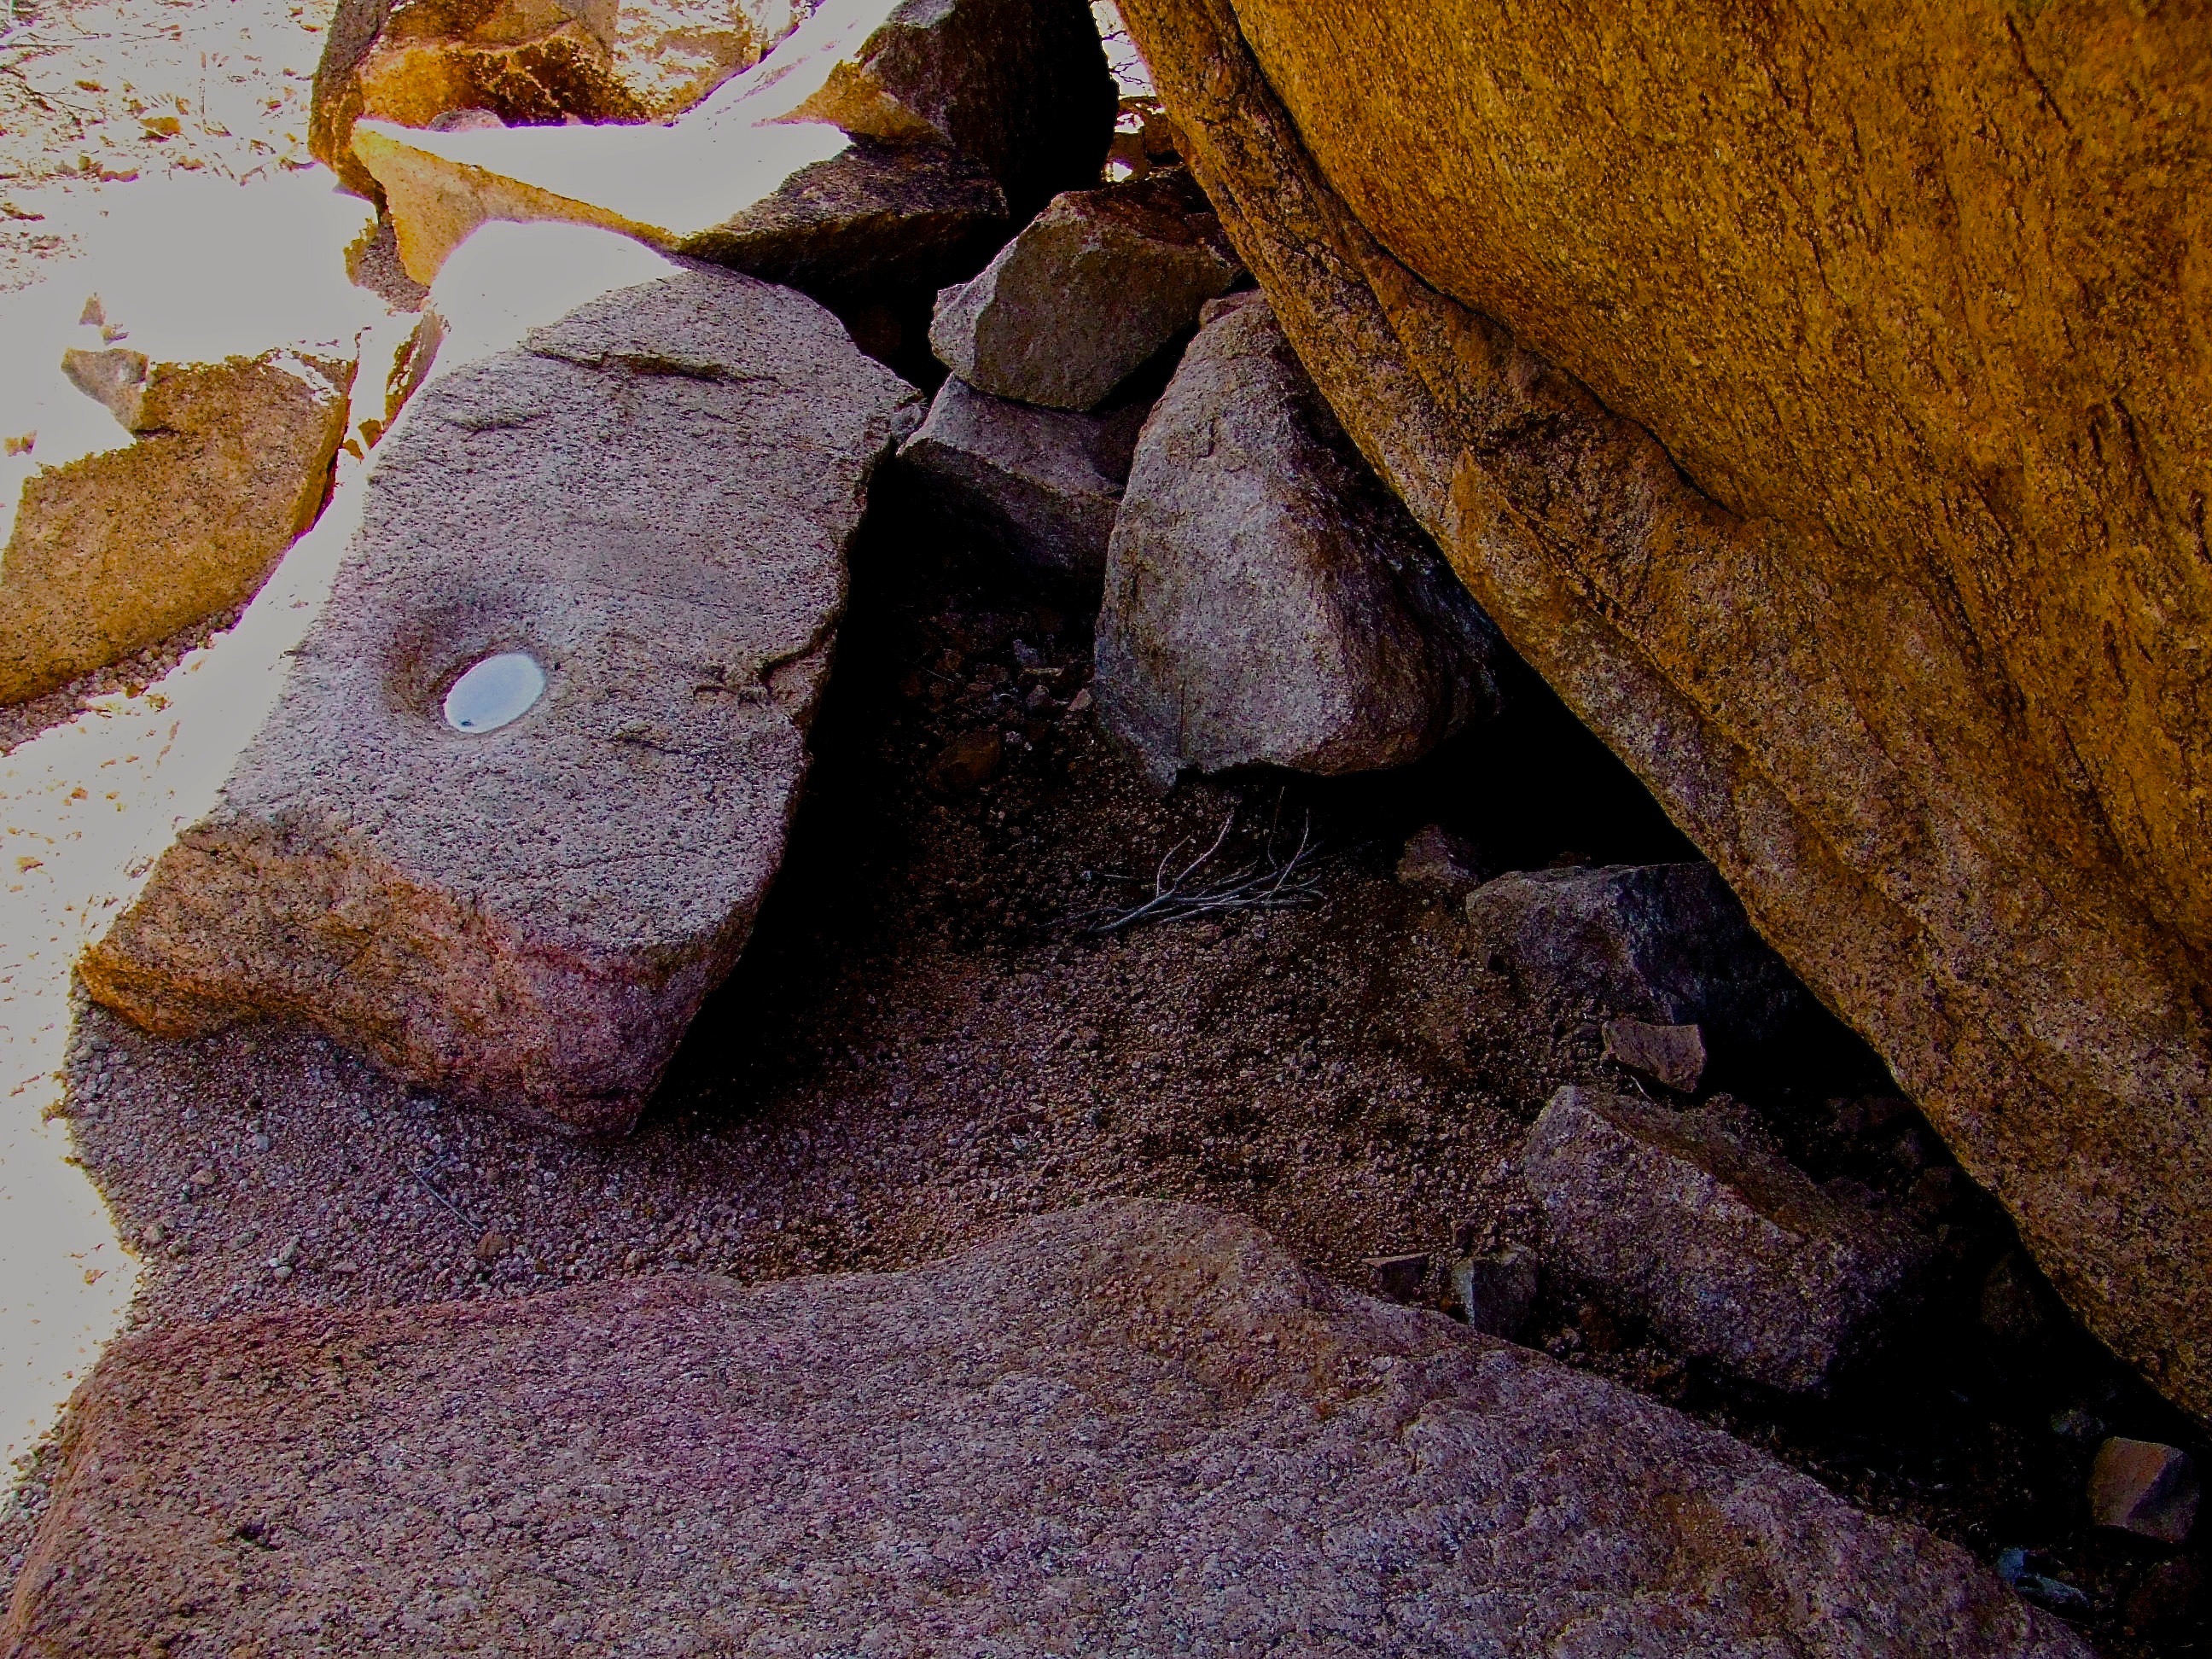 rain-filled ancient bedrock mortar for grinding mesquite pods with a stone pestle 